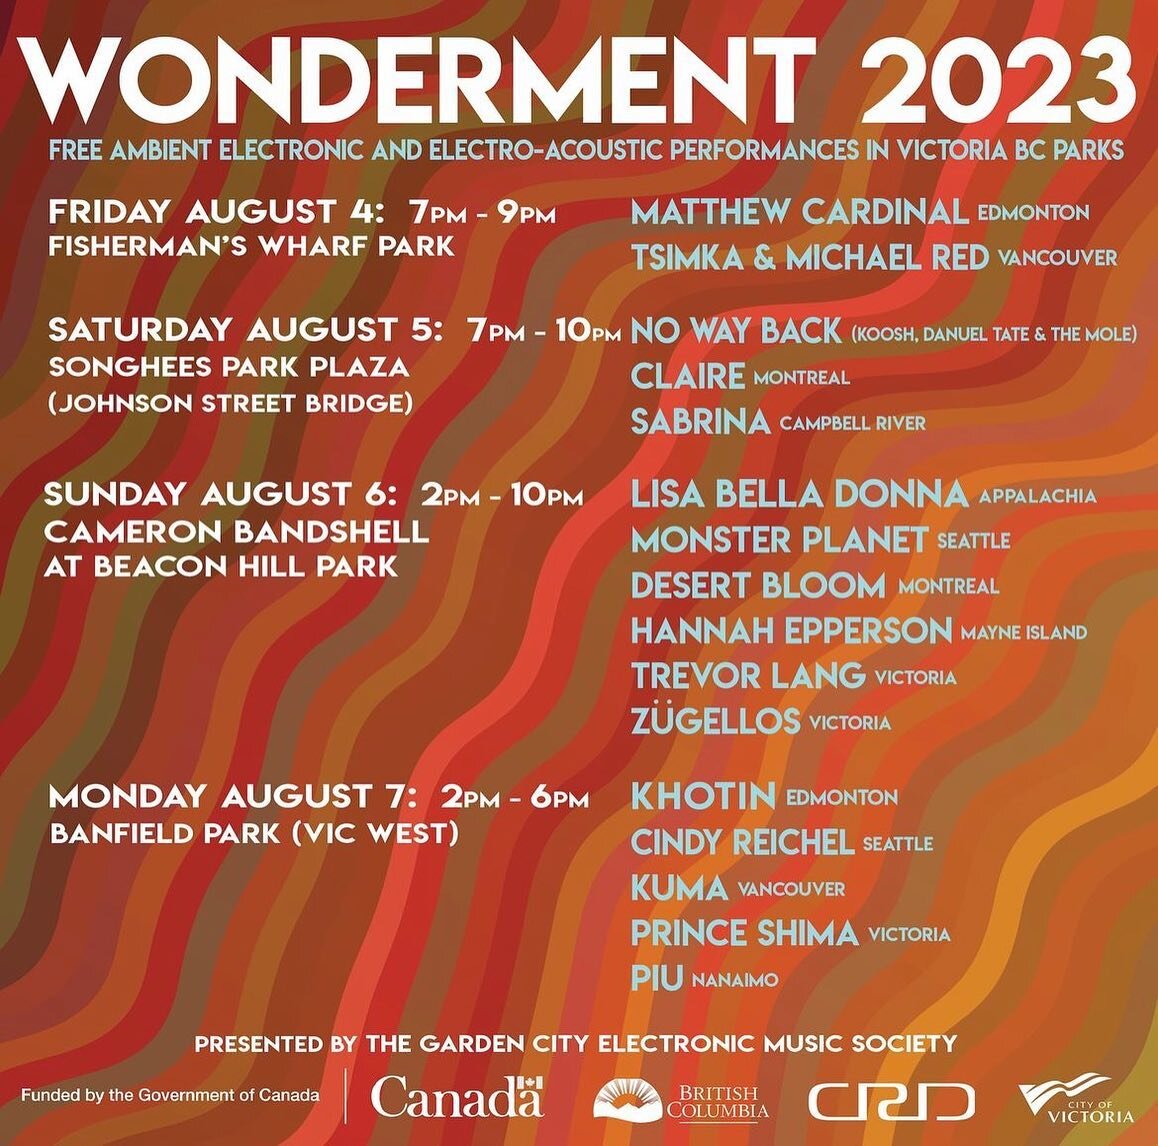 For our next trick, we are participating in the @wondermentvictoria festival, happening Aug. 4-7 in Victoria, BC, Canada. We are part of the Sunday lineup. It&rsquo;s free!